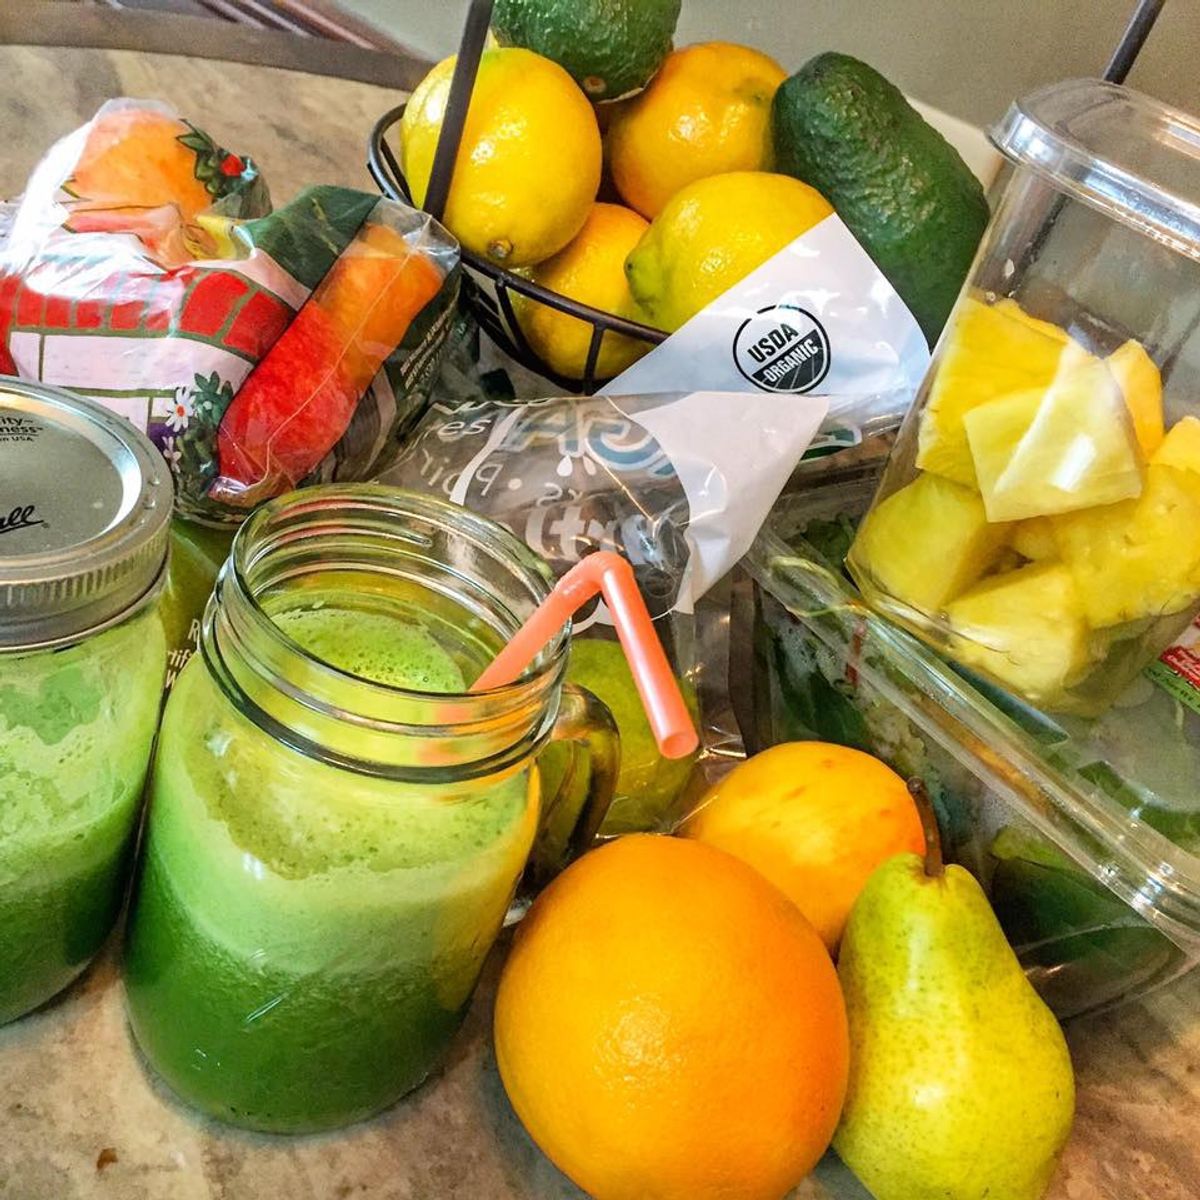 Is A Juice Cleanse The Answer?